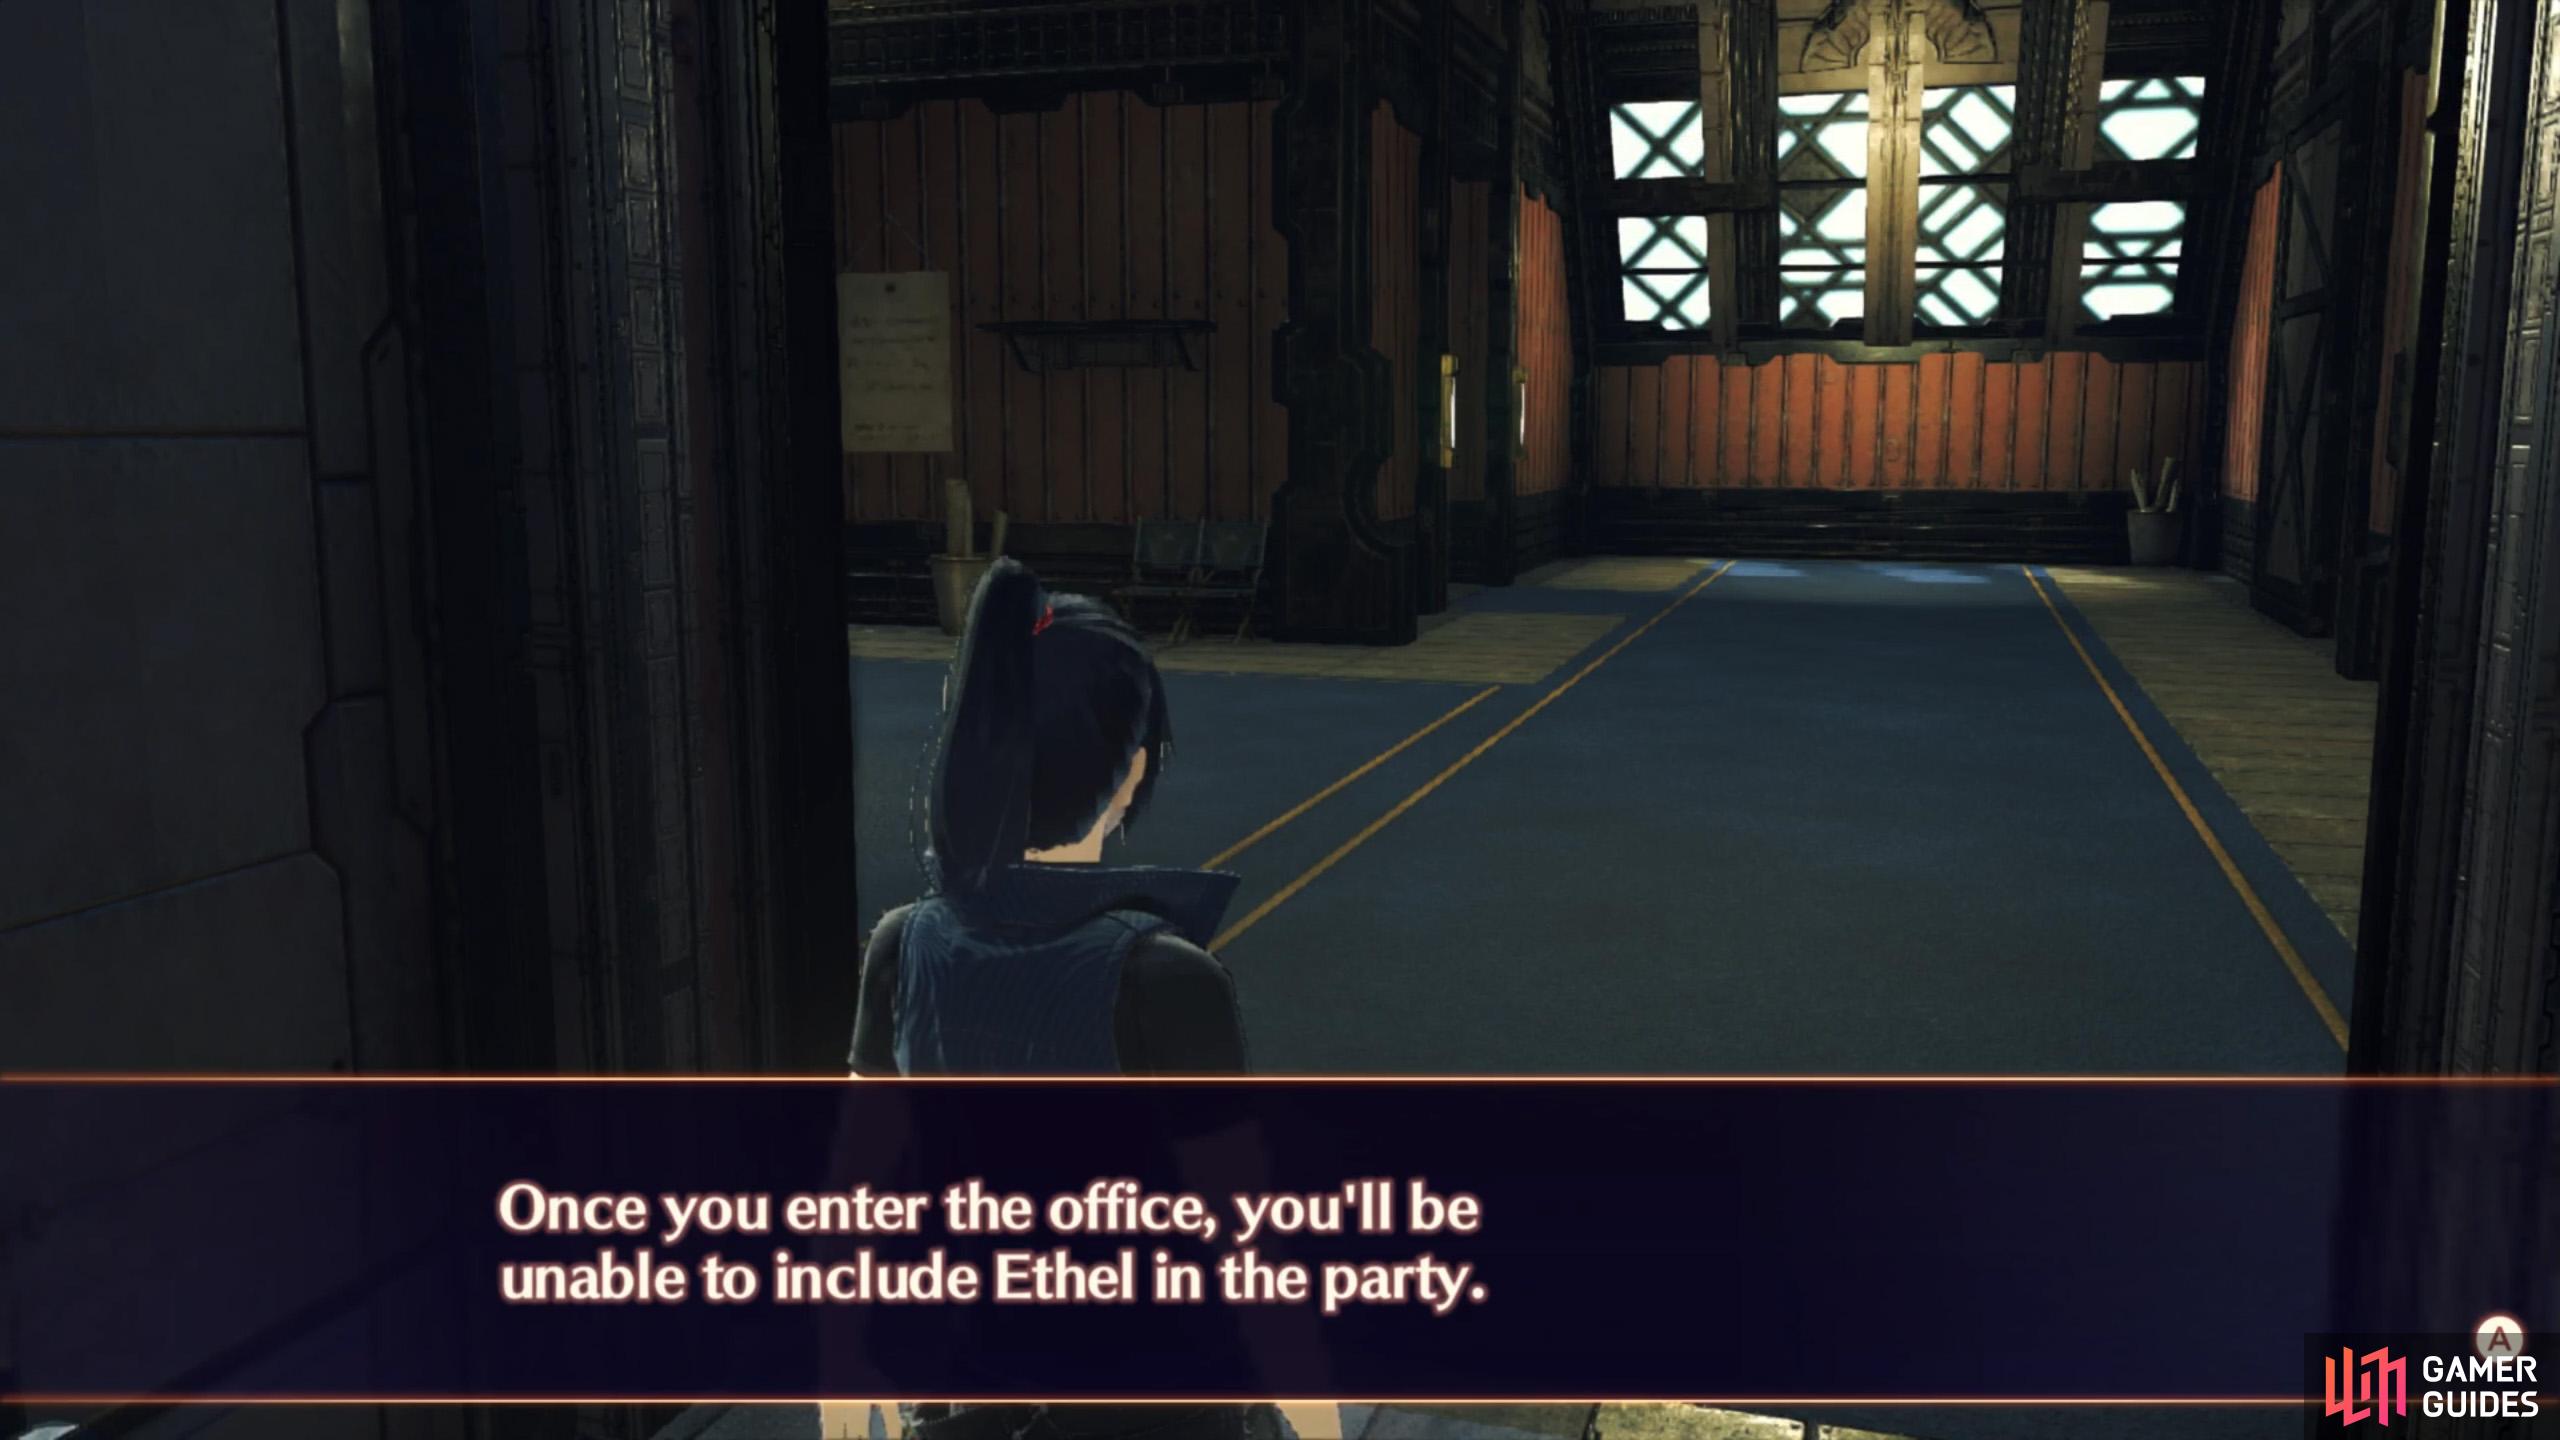 Ethel will leave your party after speaking to her.